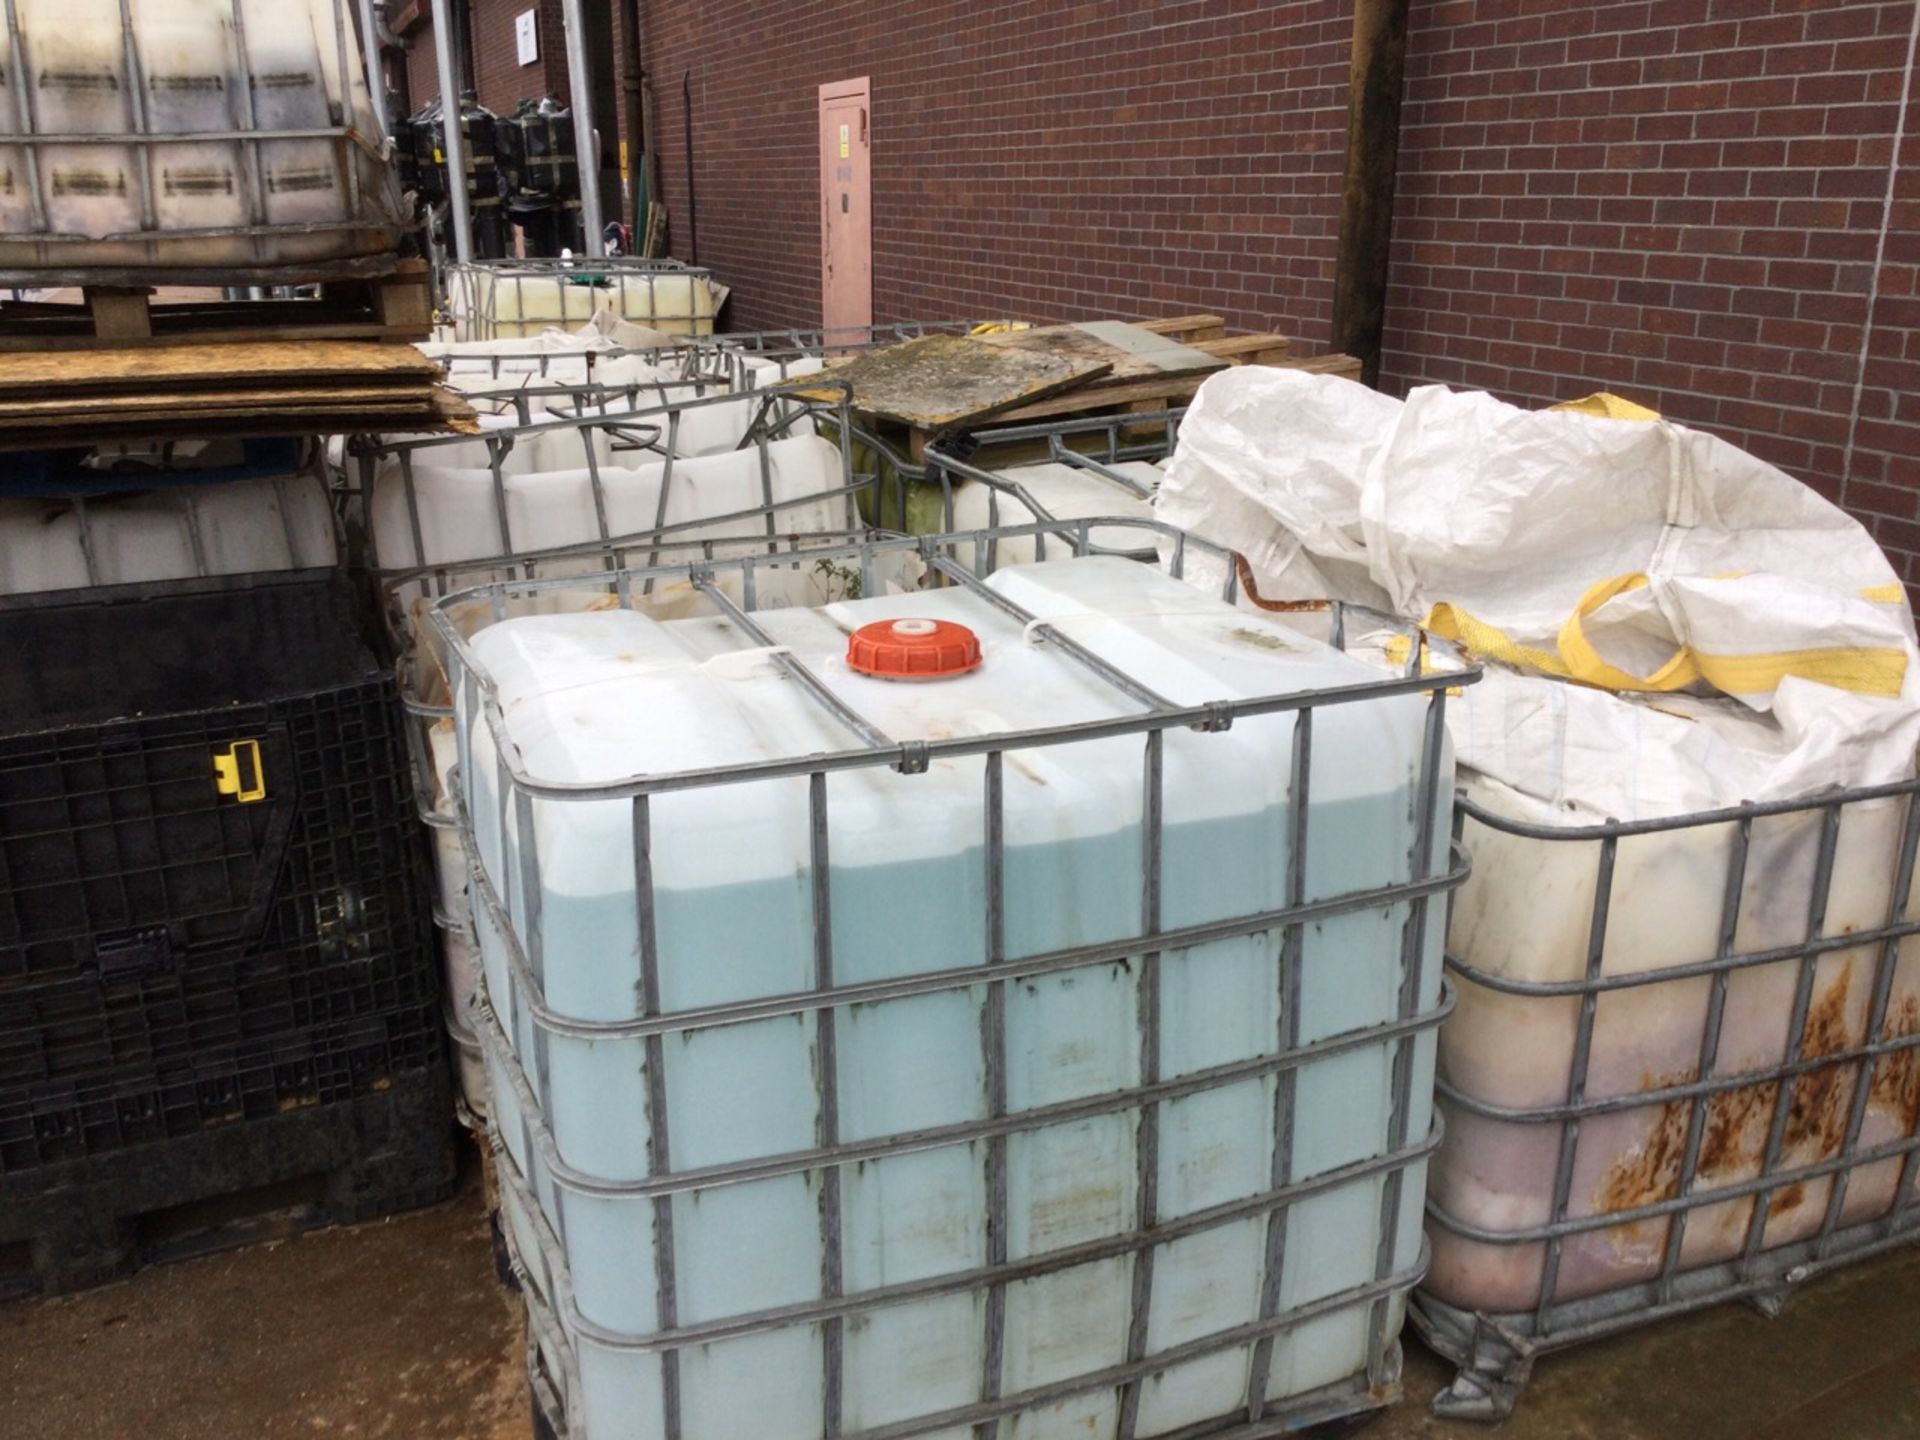 Approximately 35 Open IBC Containers Of Mixed Aggregate Suitable For Hard Core Or Other Building Pur - Image 3 of 3